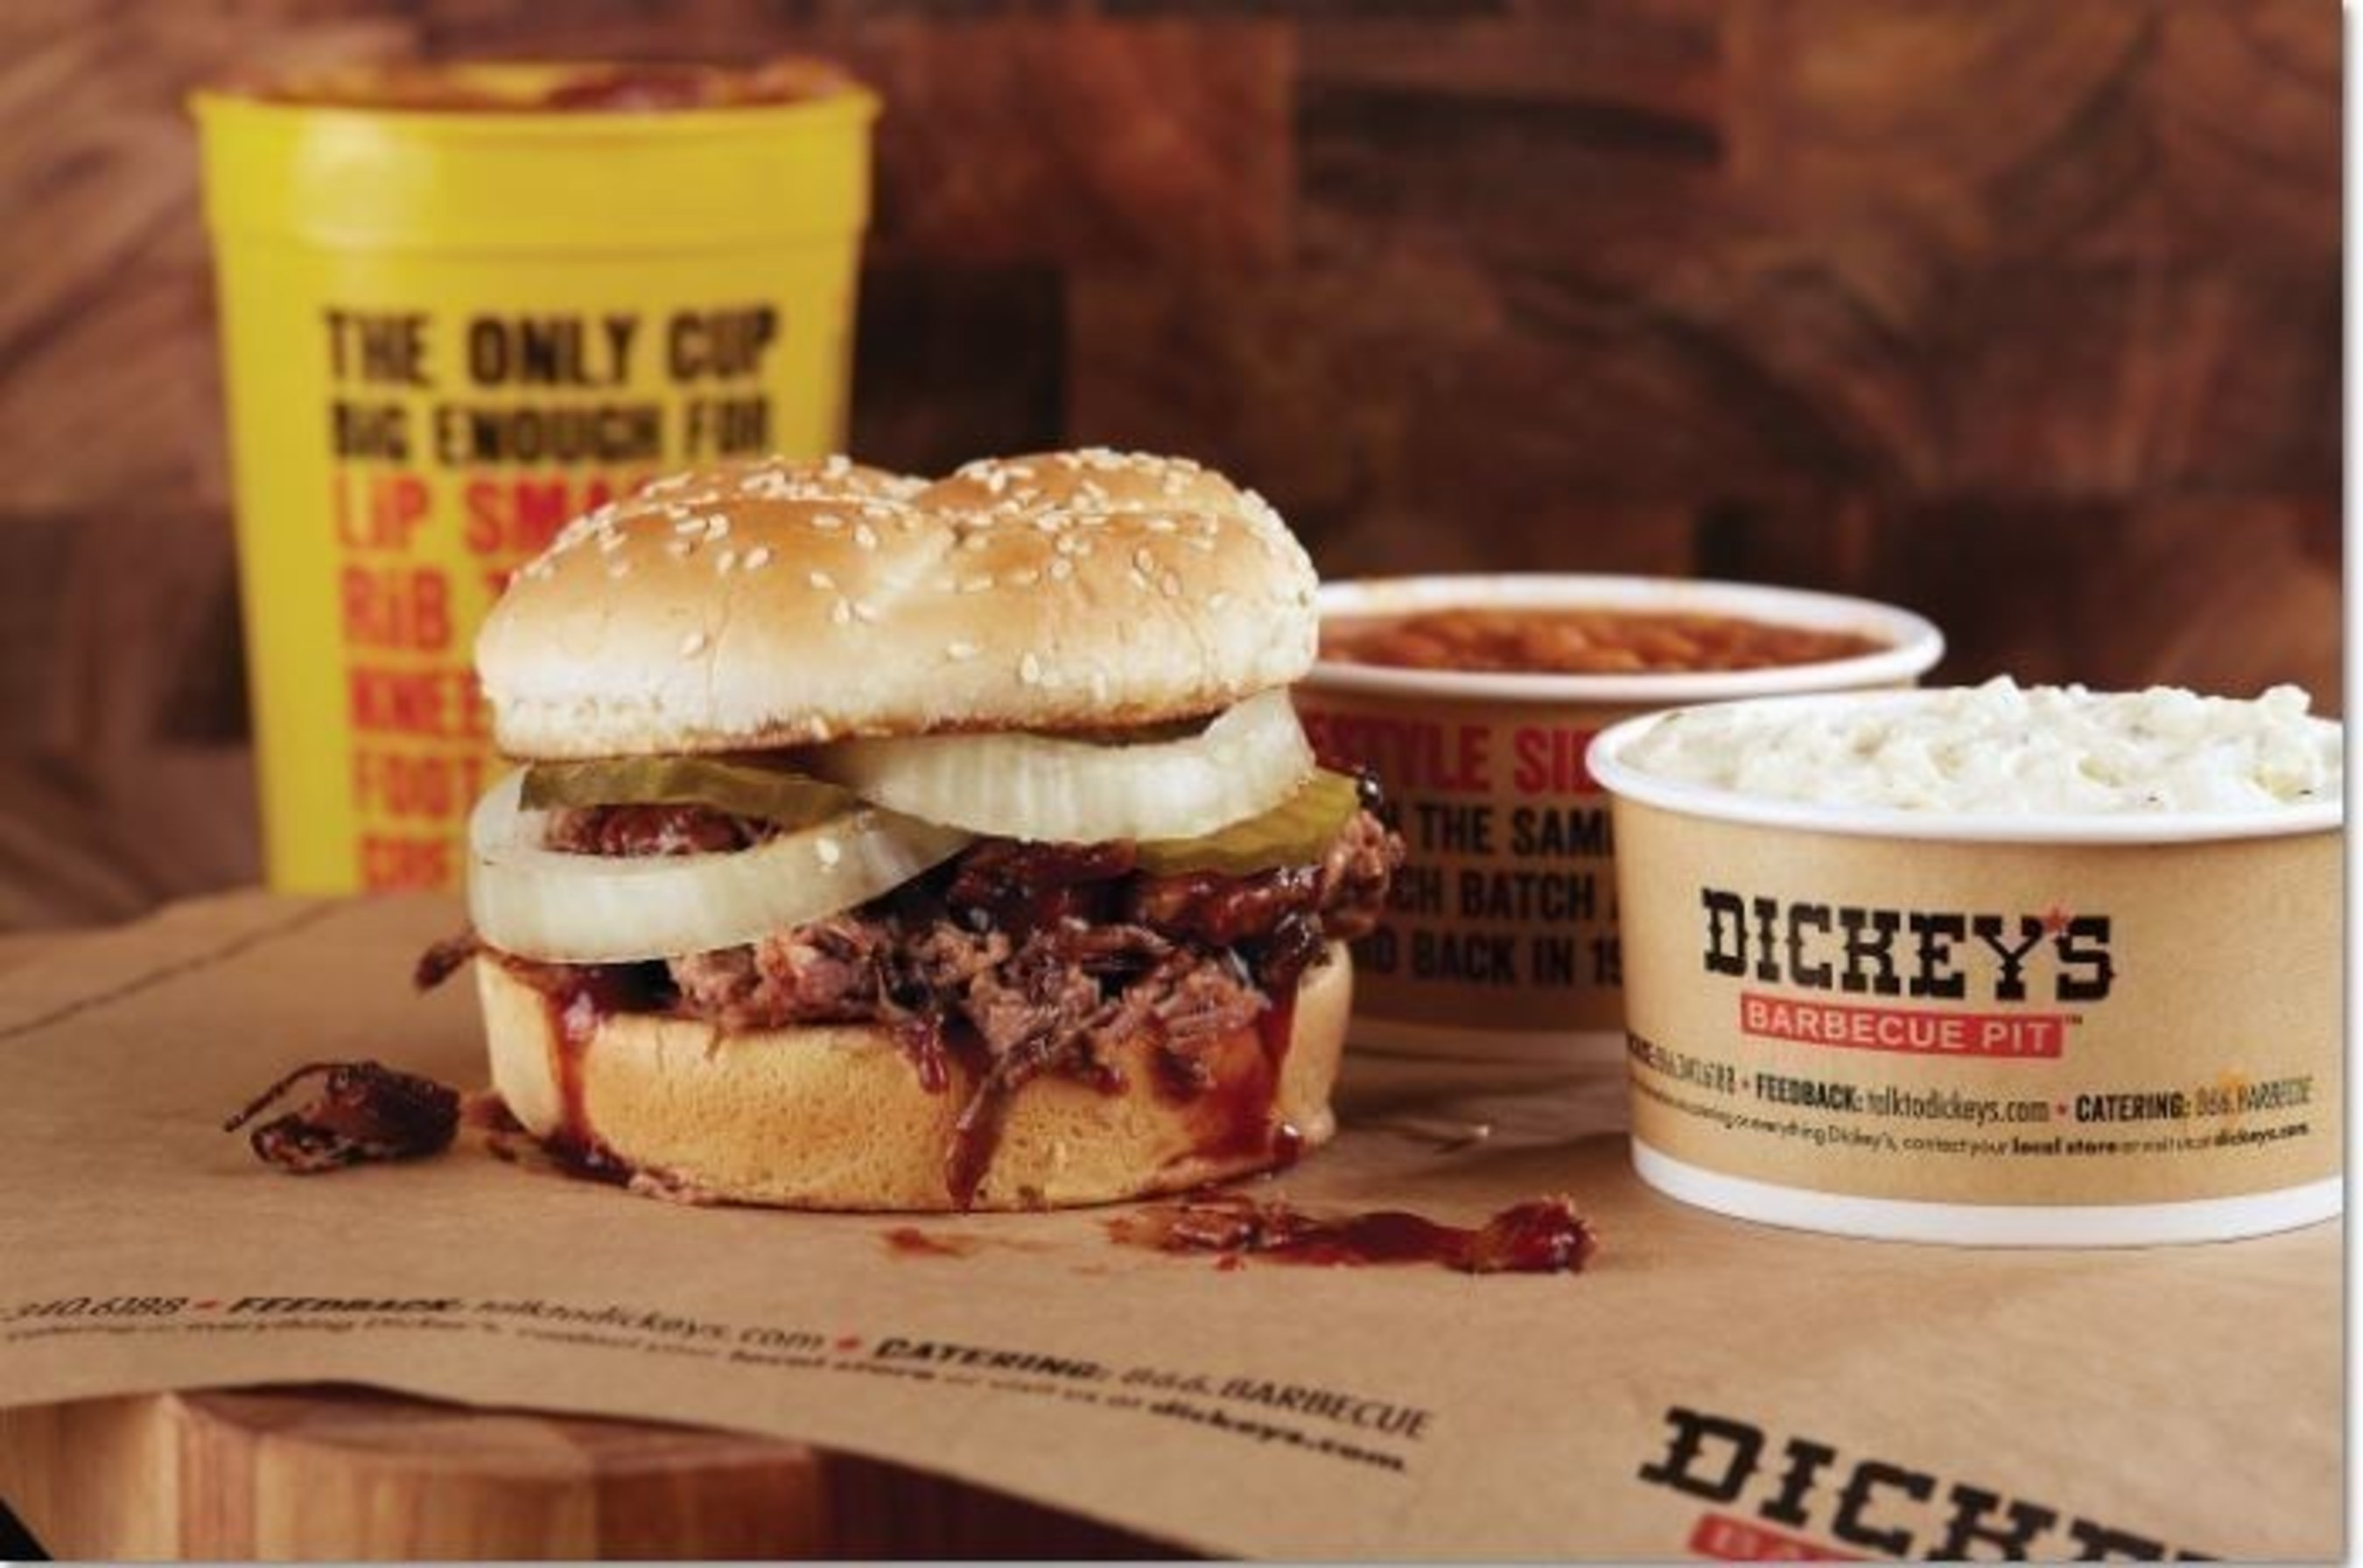 Where is the best barbecue in Loveland? Dickey's Barbecue Pit. Grand opening kicks off Thursday with the first 50 guest receiving gift cards.